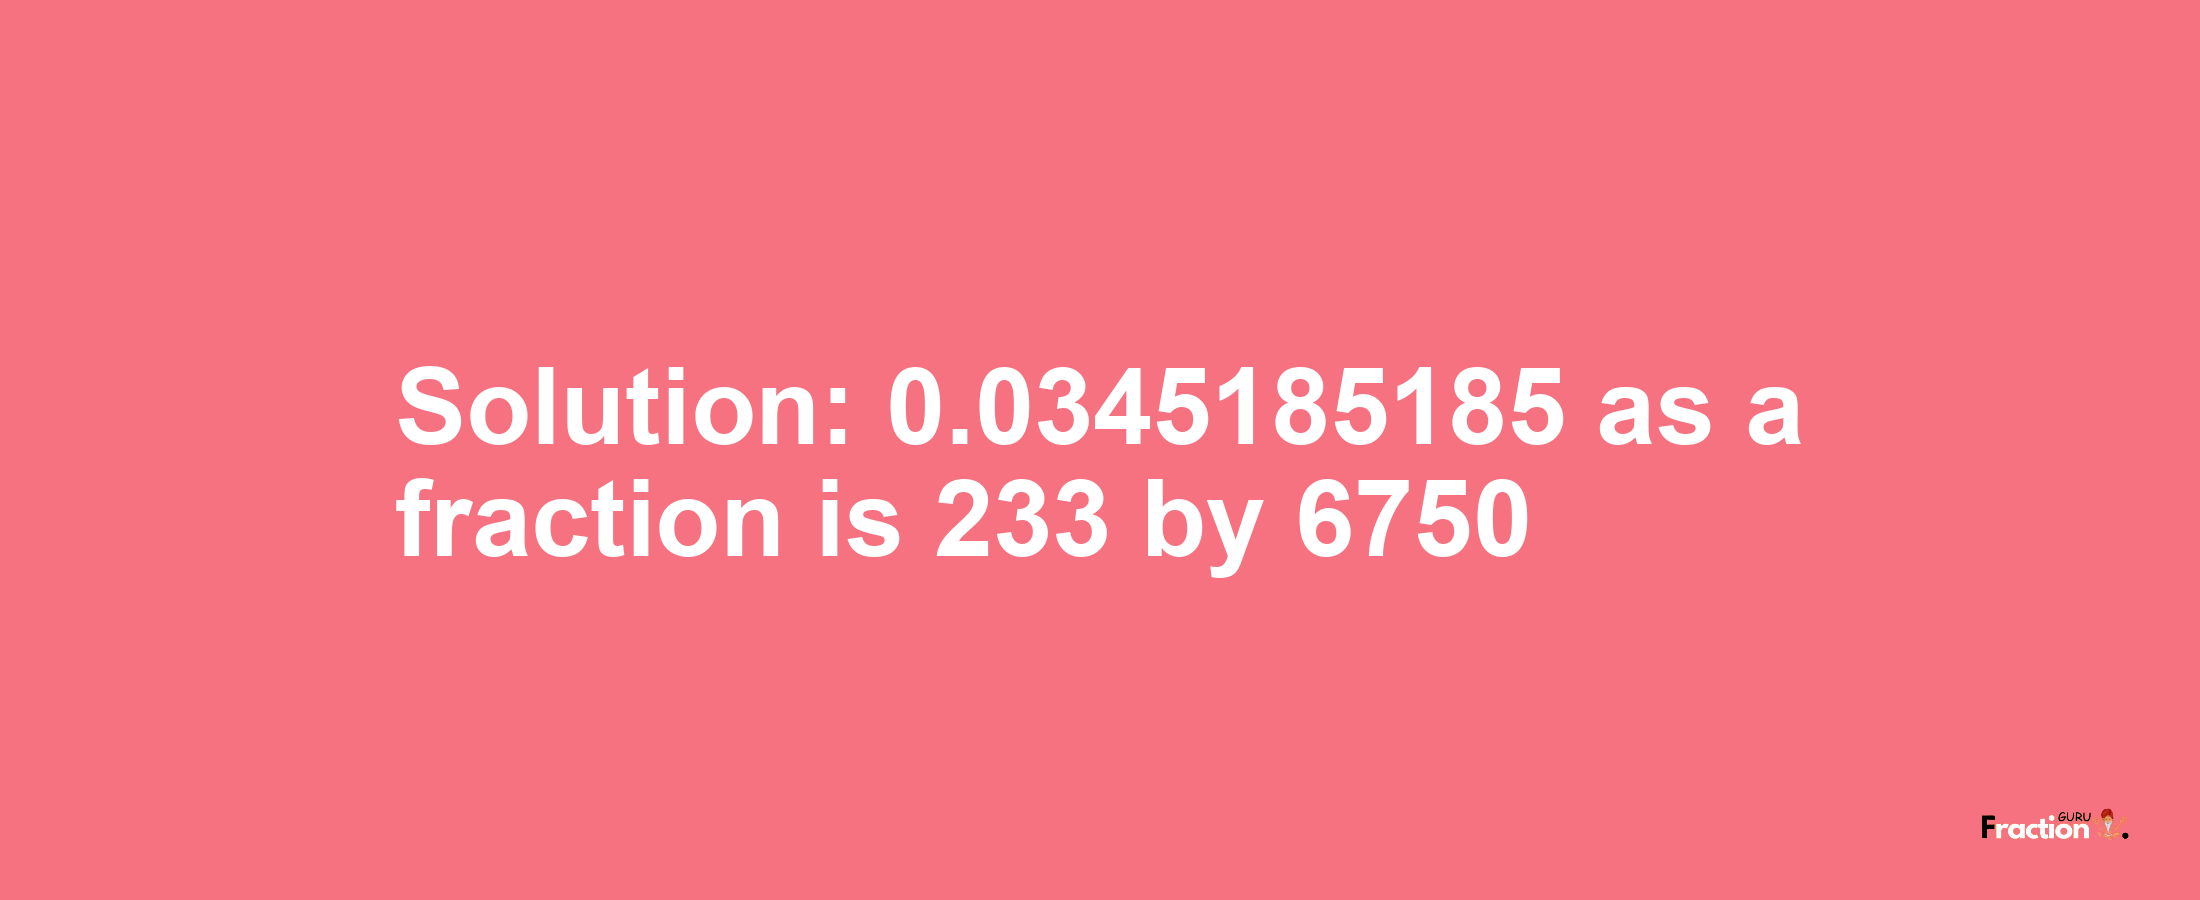 Solution:0.0345185185 as a fraction is 233/6750